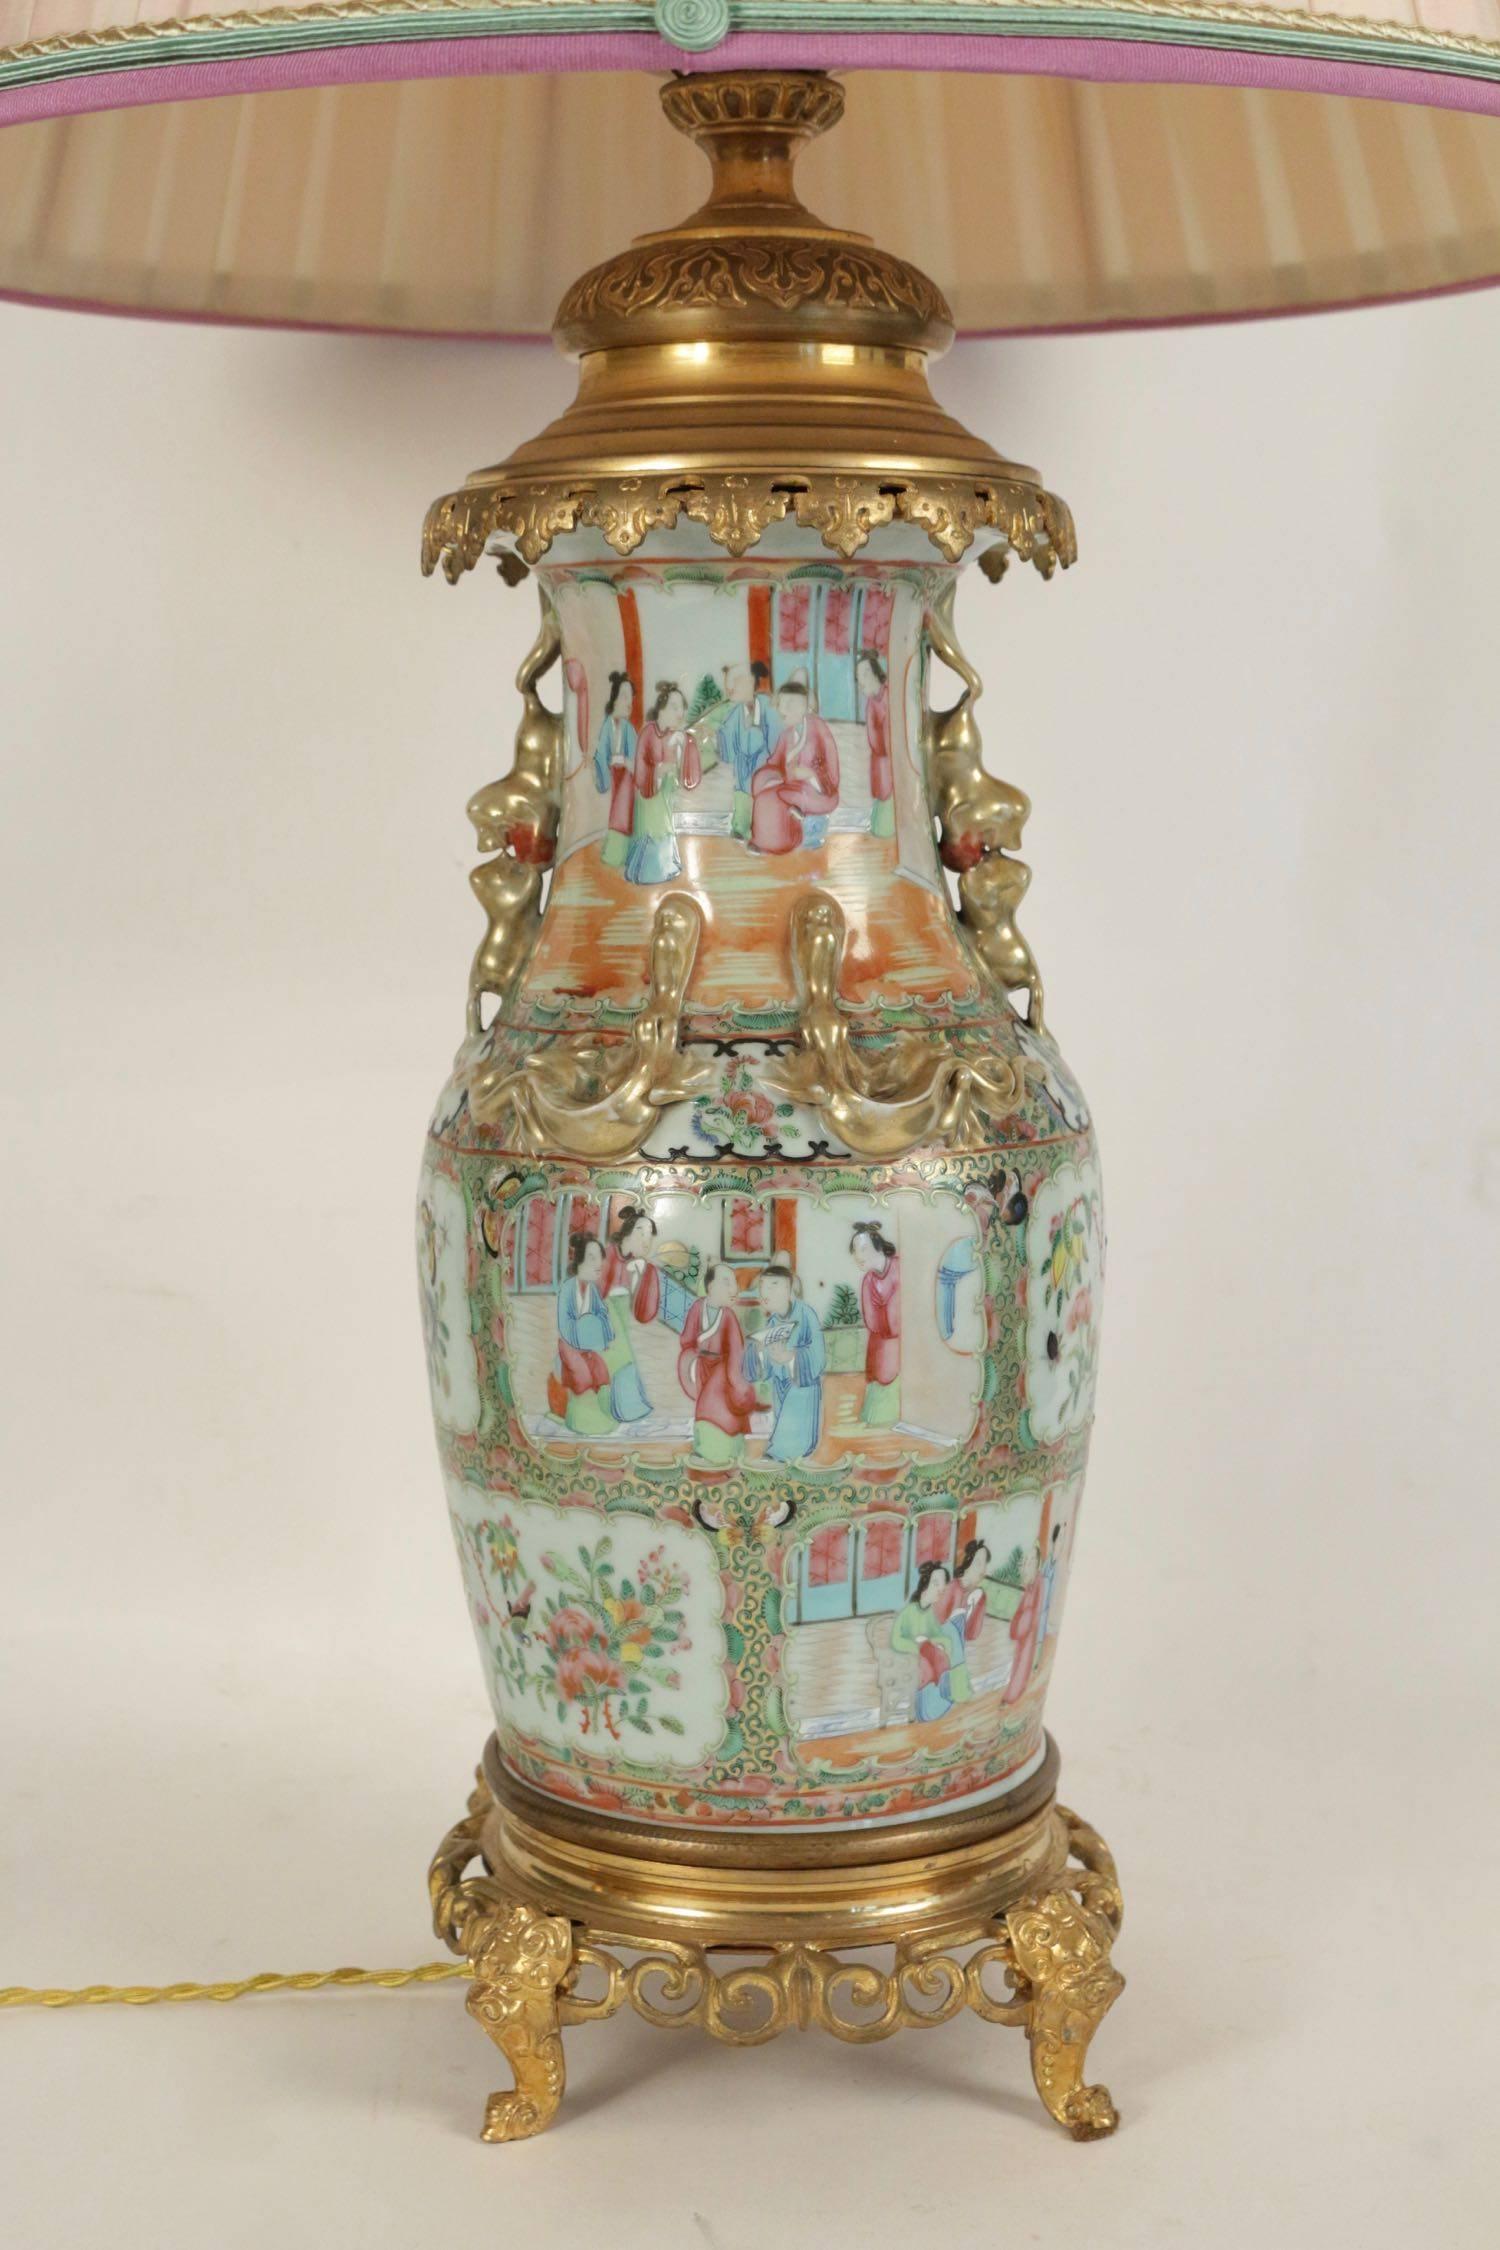 Chinese porcelain lamp from the 19th century mounted on gold gilt bronze base decorated with the scene of the period.
 